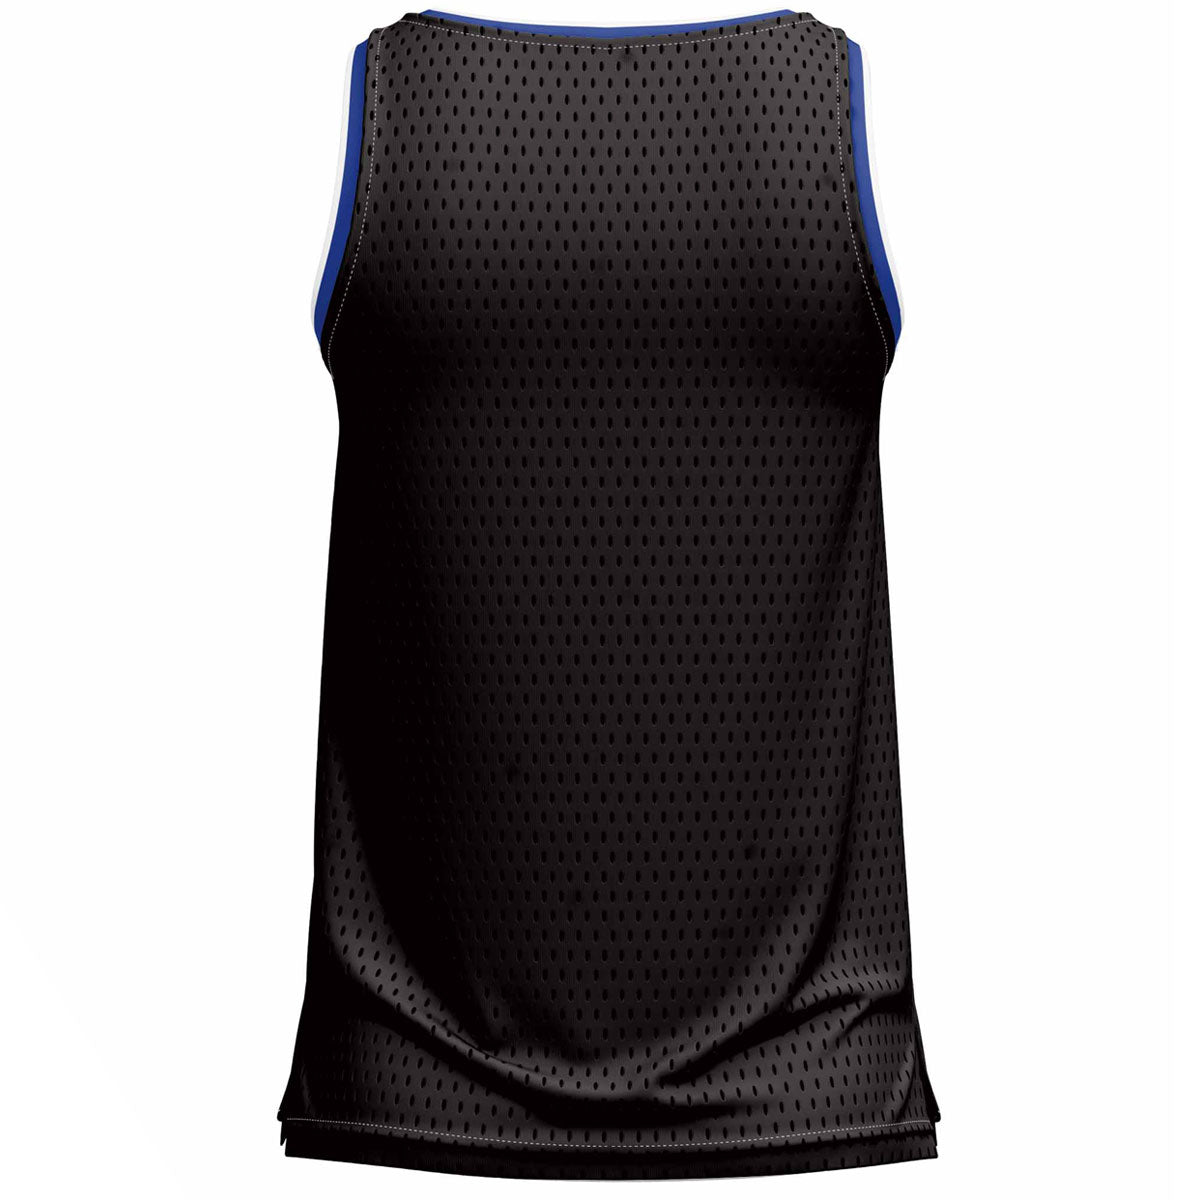 Mc Keever Tyrone Towers Basketball Team Vest - Youth - Black